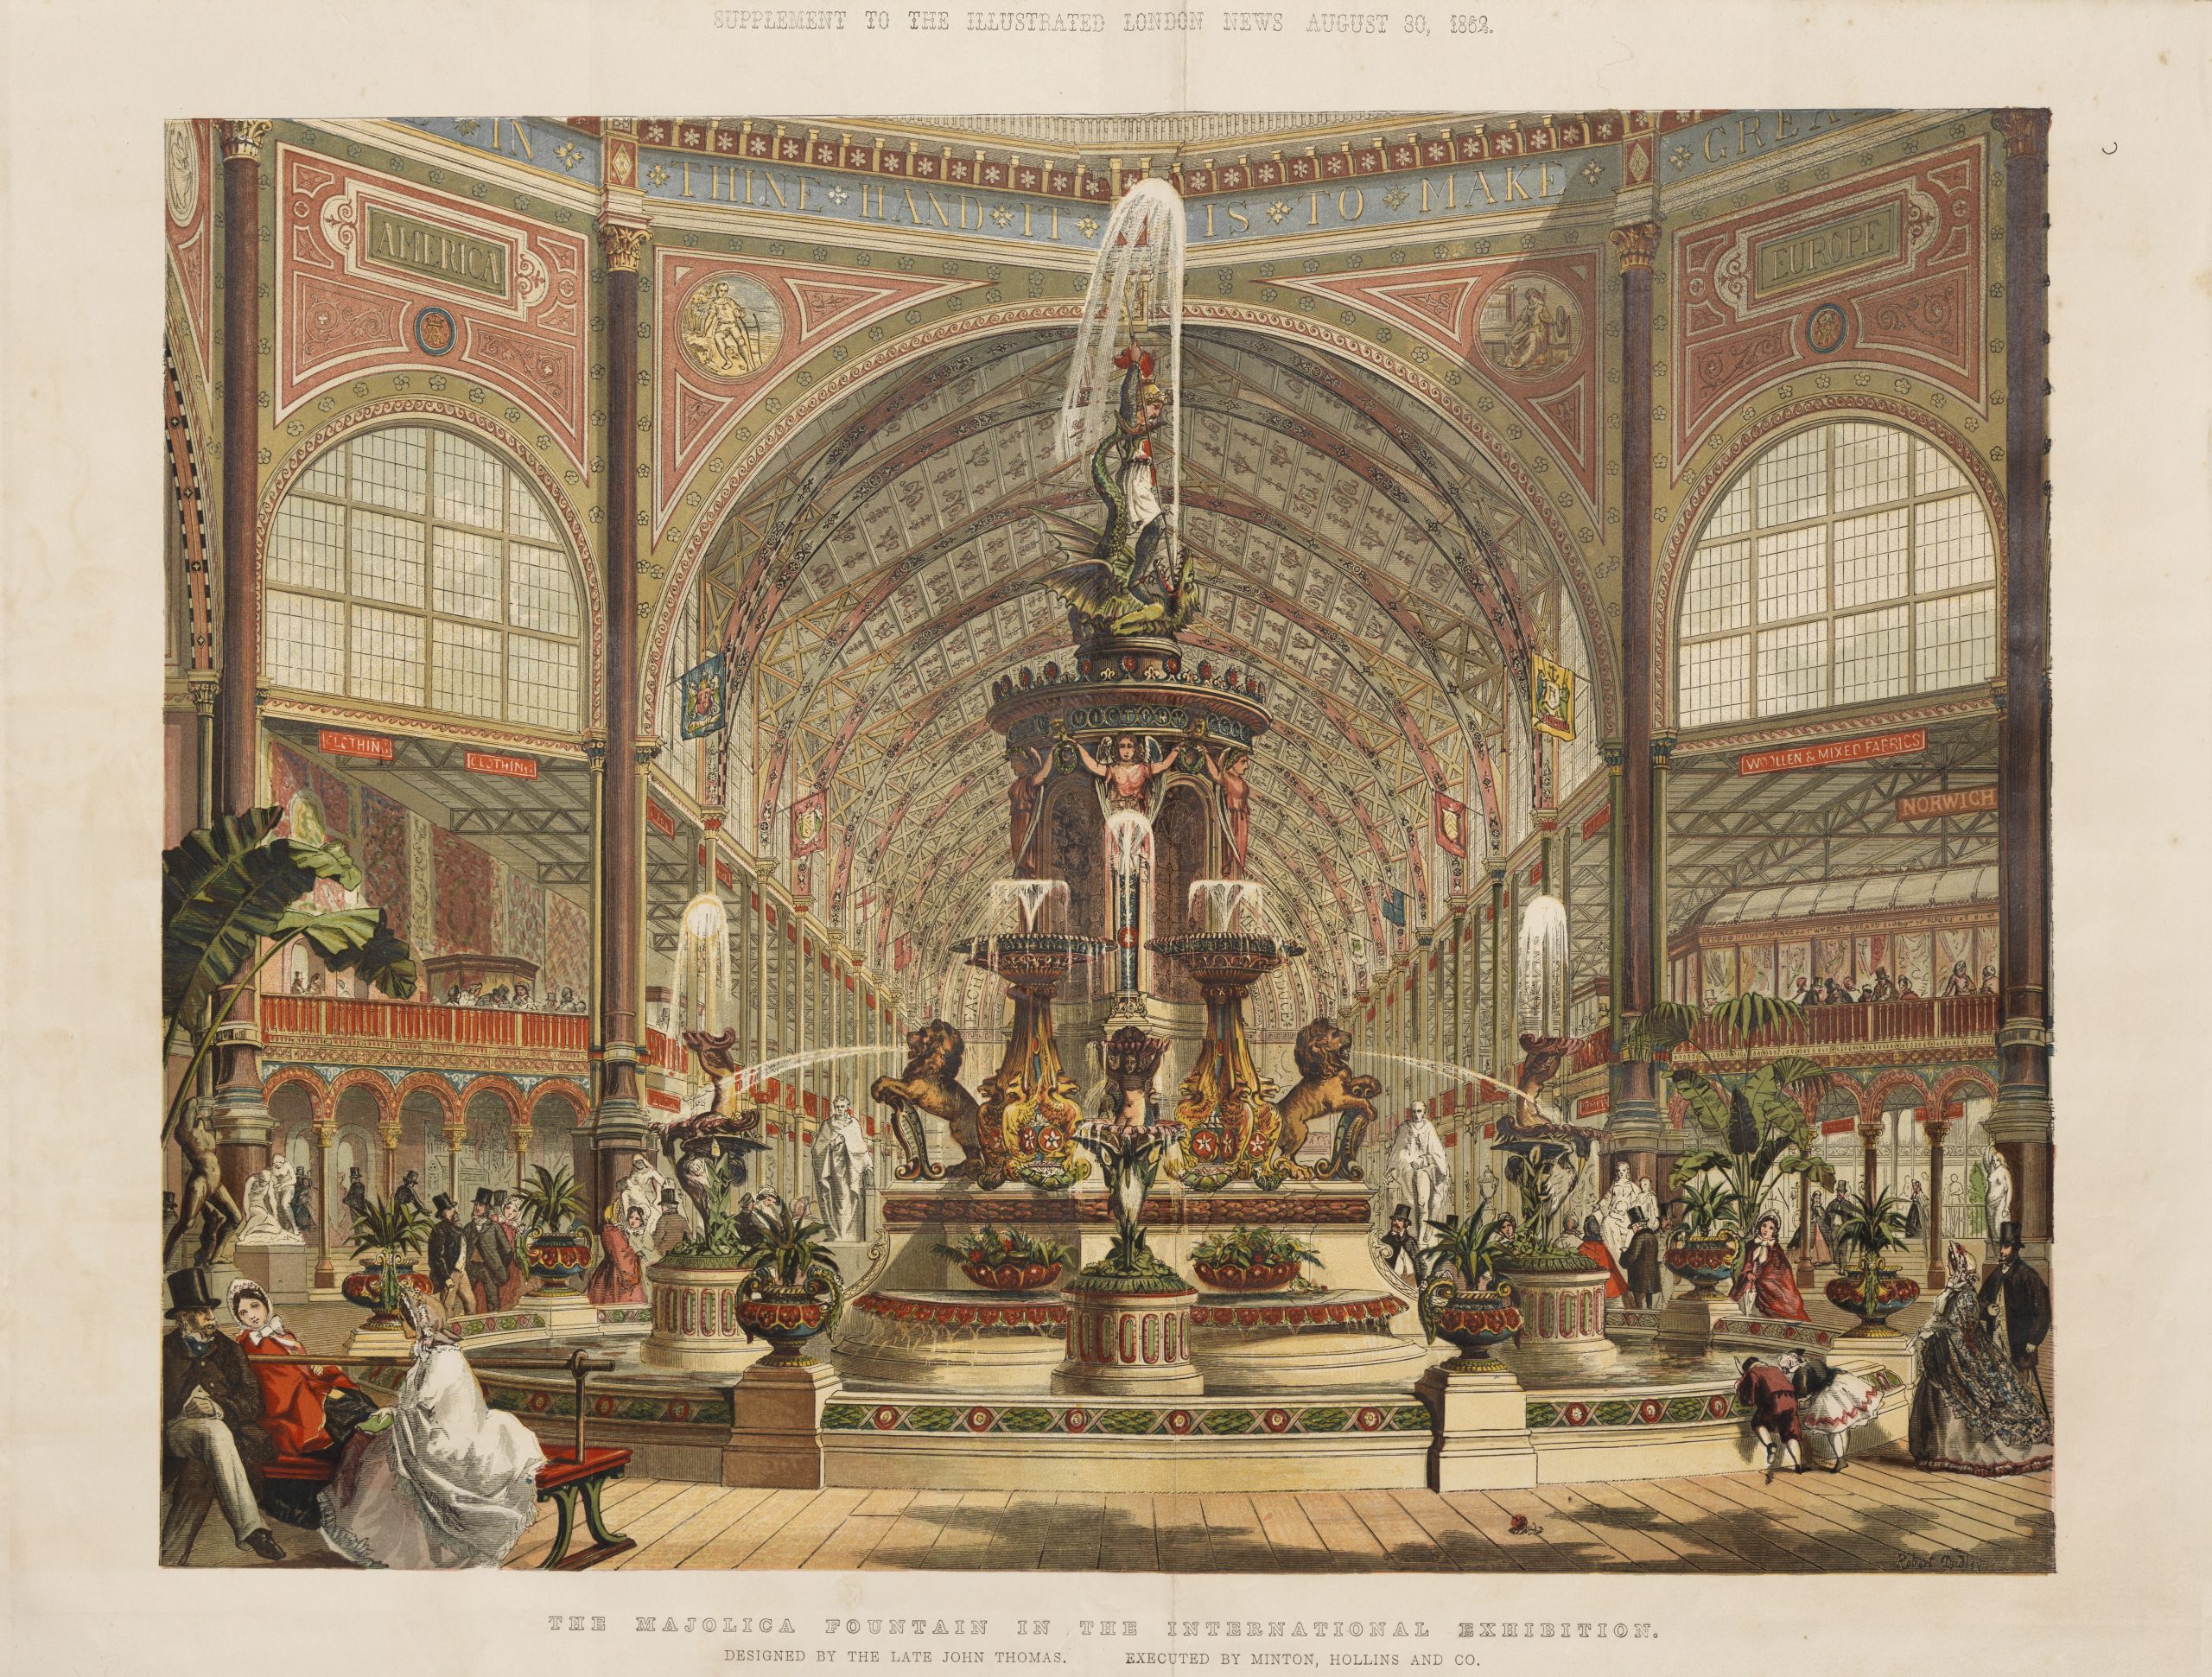 Print of the grand Majolica Fountain inside a cavernous windowed hall.